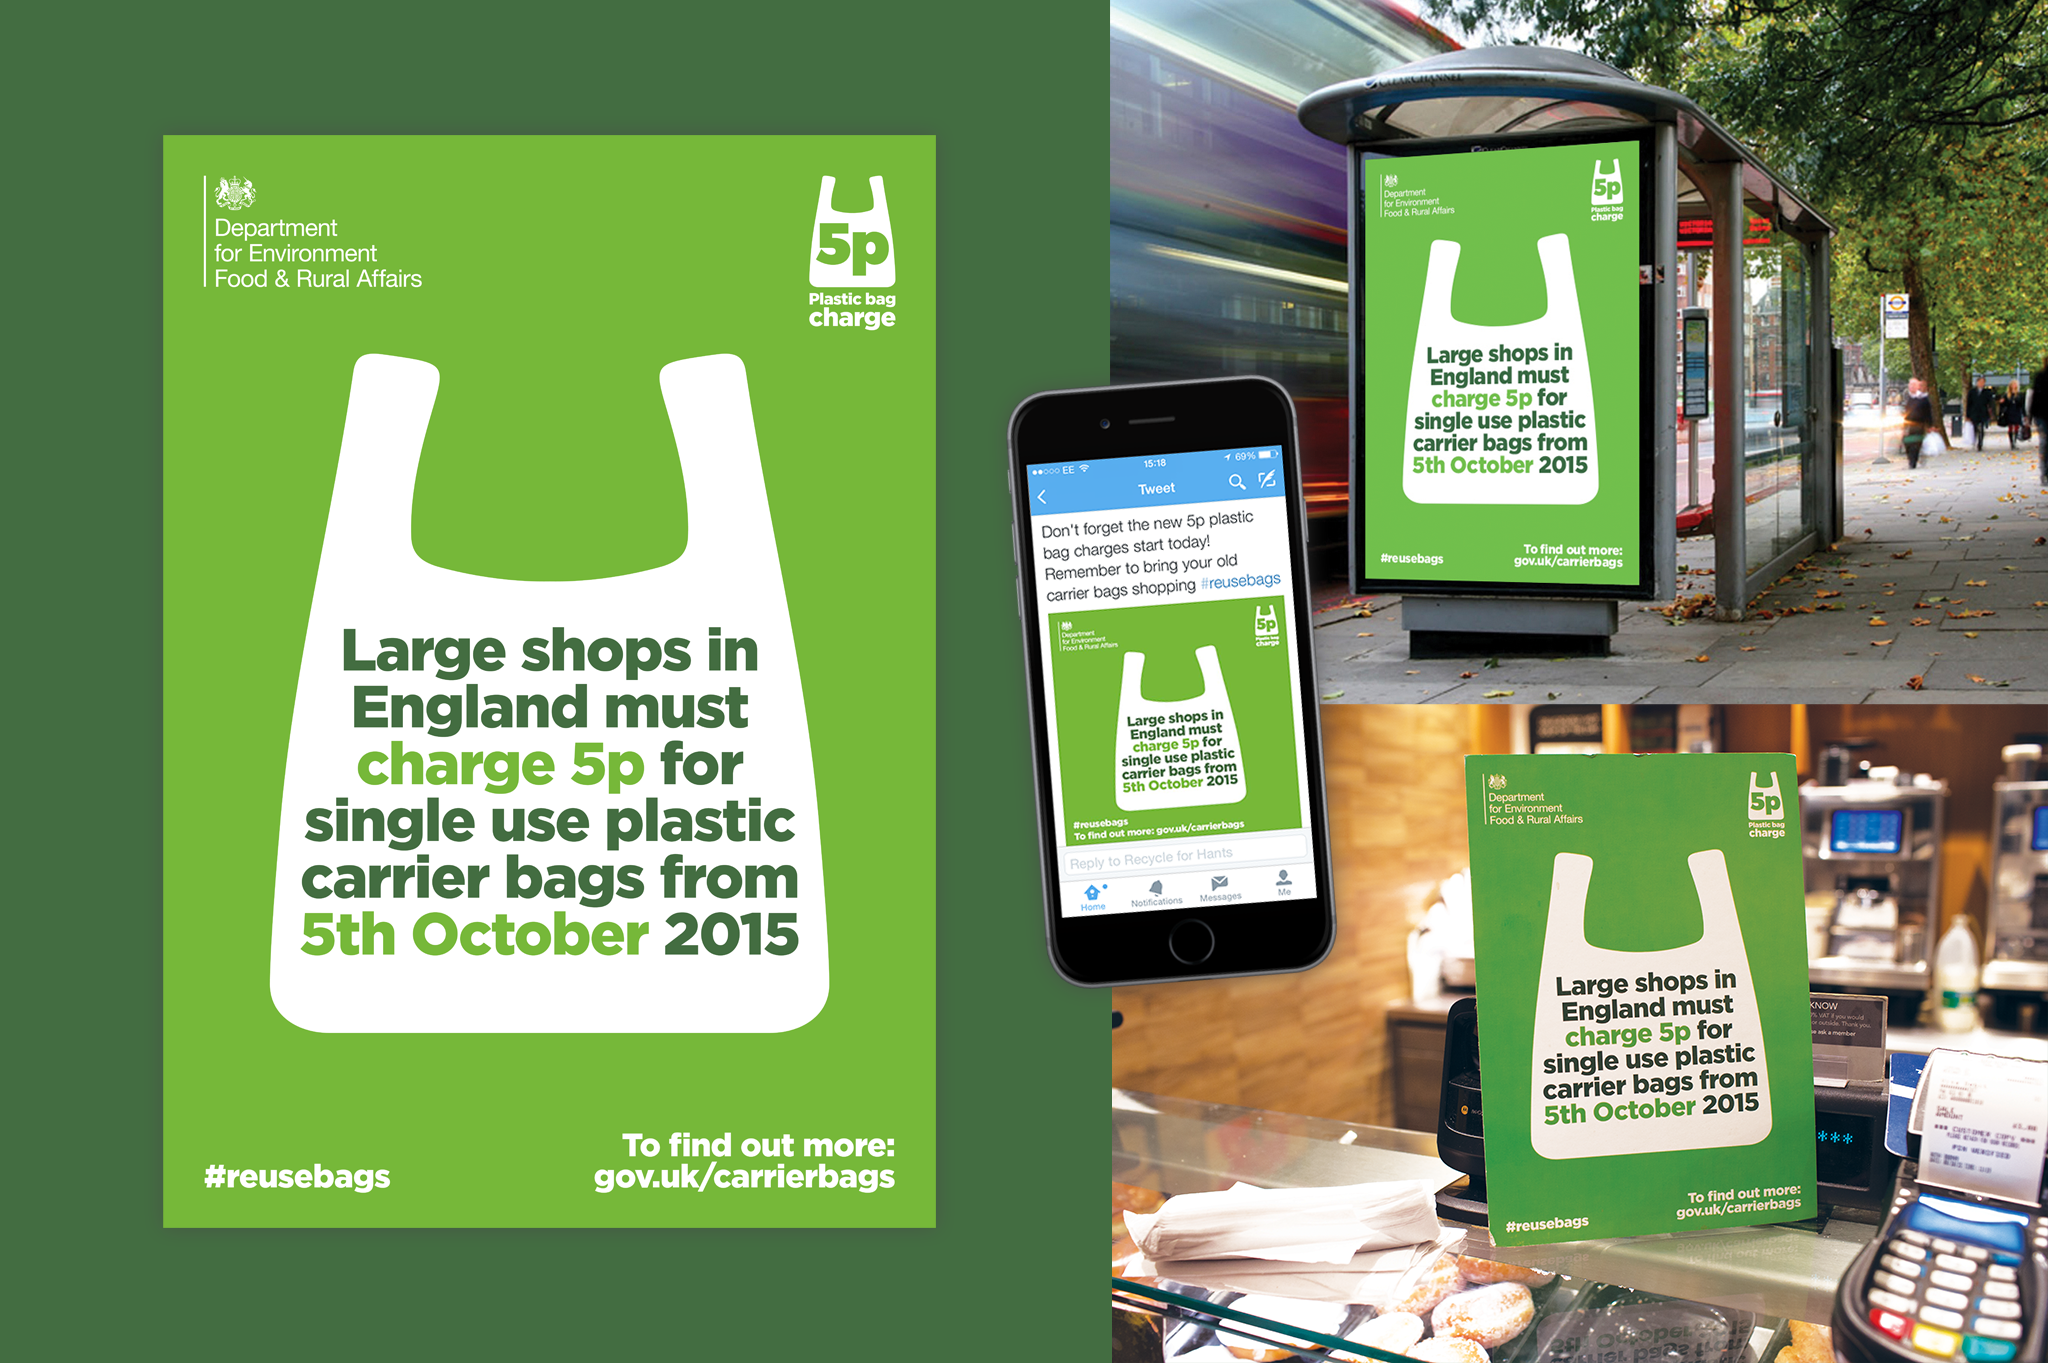 DEFRA assets promoting the campaign for the introduction of 5p carrier bags incuding bus stop digital poster, social media advert, and shop based POS board